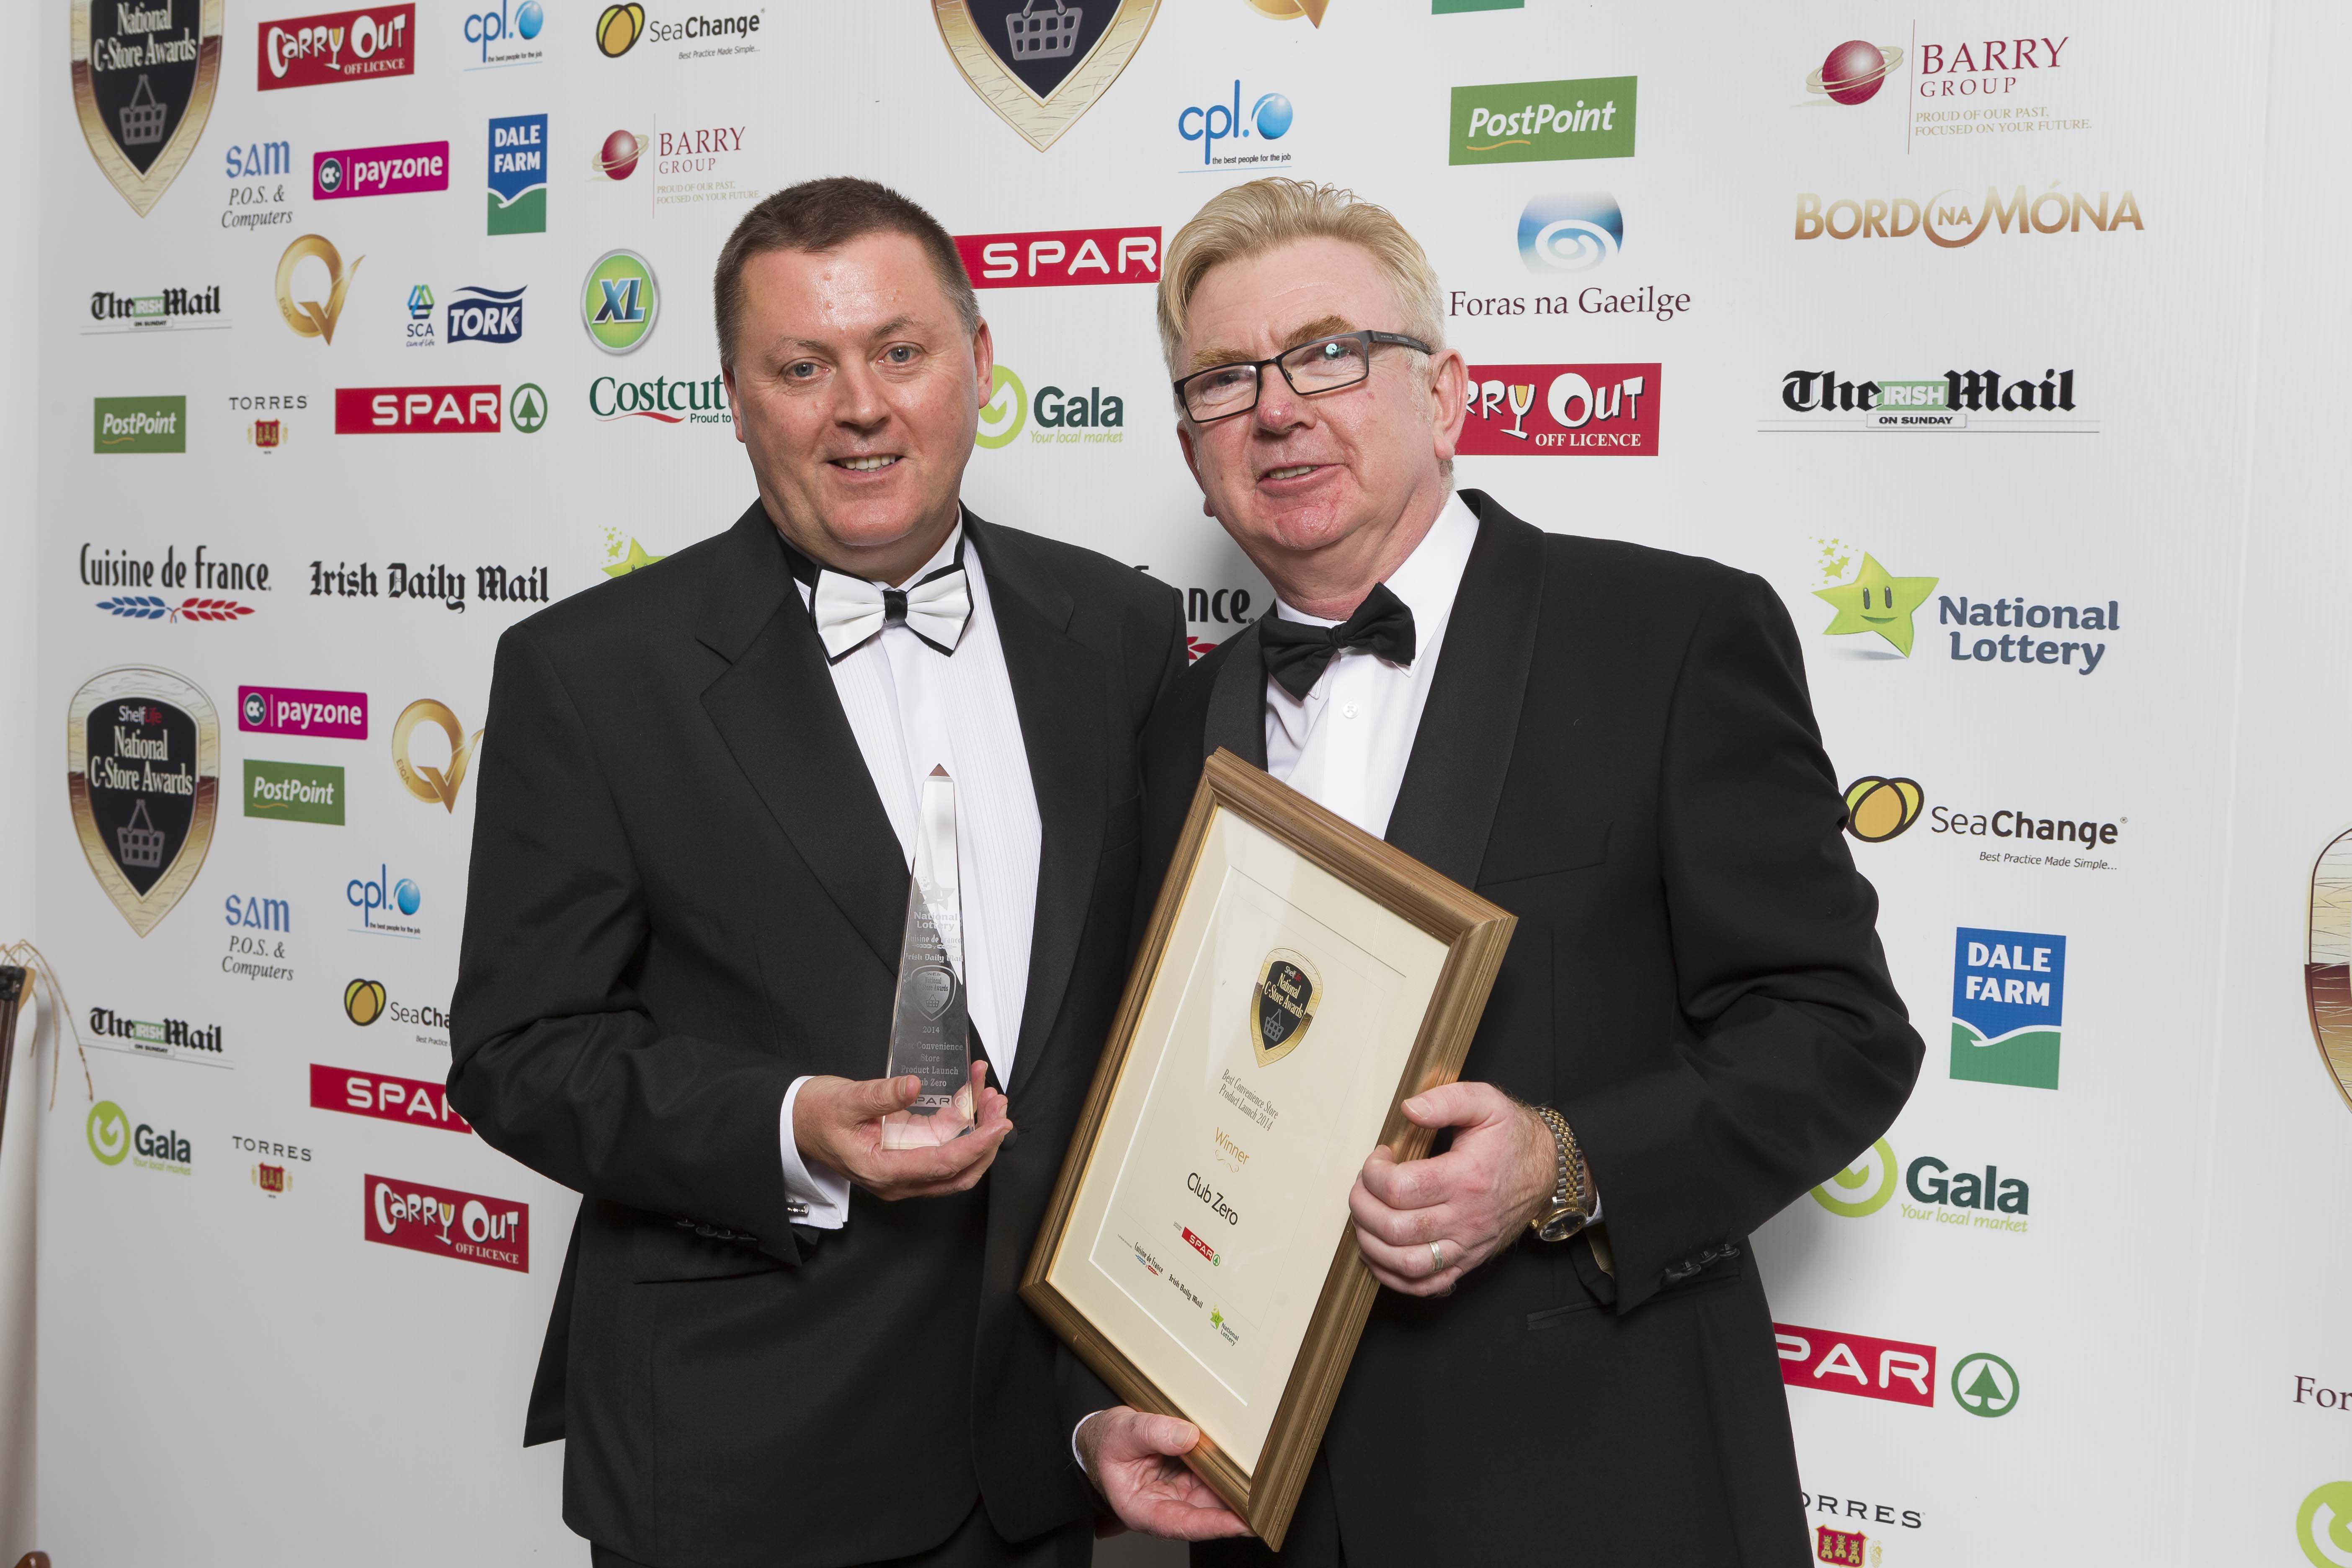 Malachy Hanberry, Sales and Retail Advisory Services director, Spar presents the award for Best New C-Store Product Launch 2014 to ShelfLife publisher John McDonald on behalf of Britvic for Club Zero